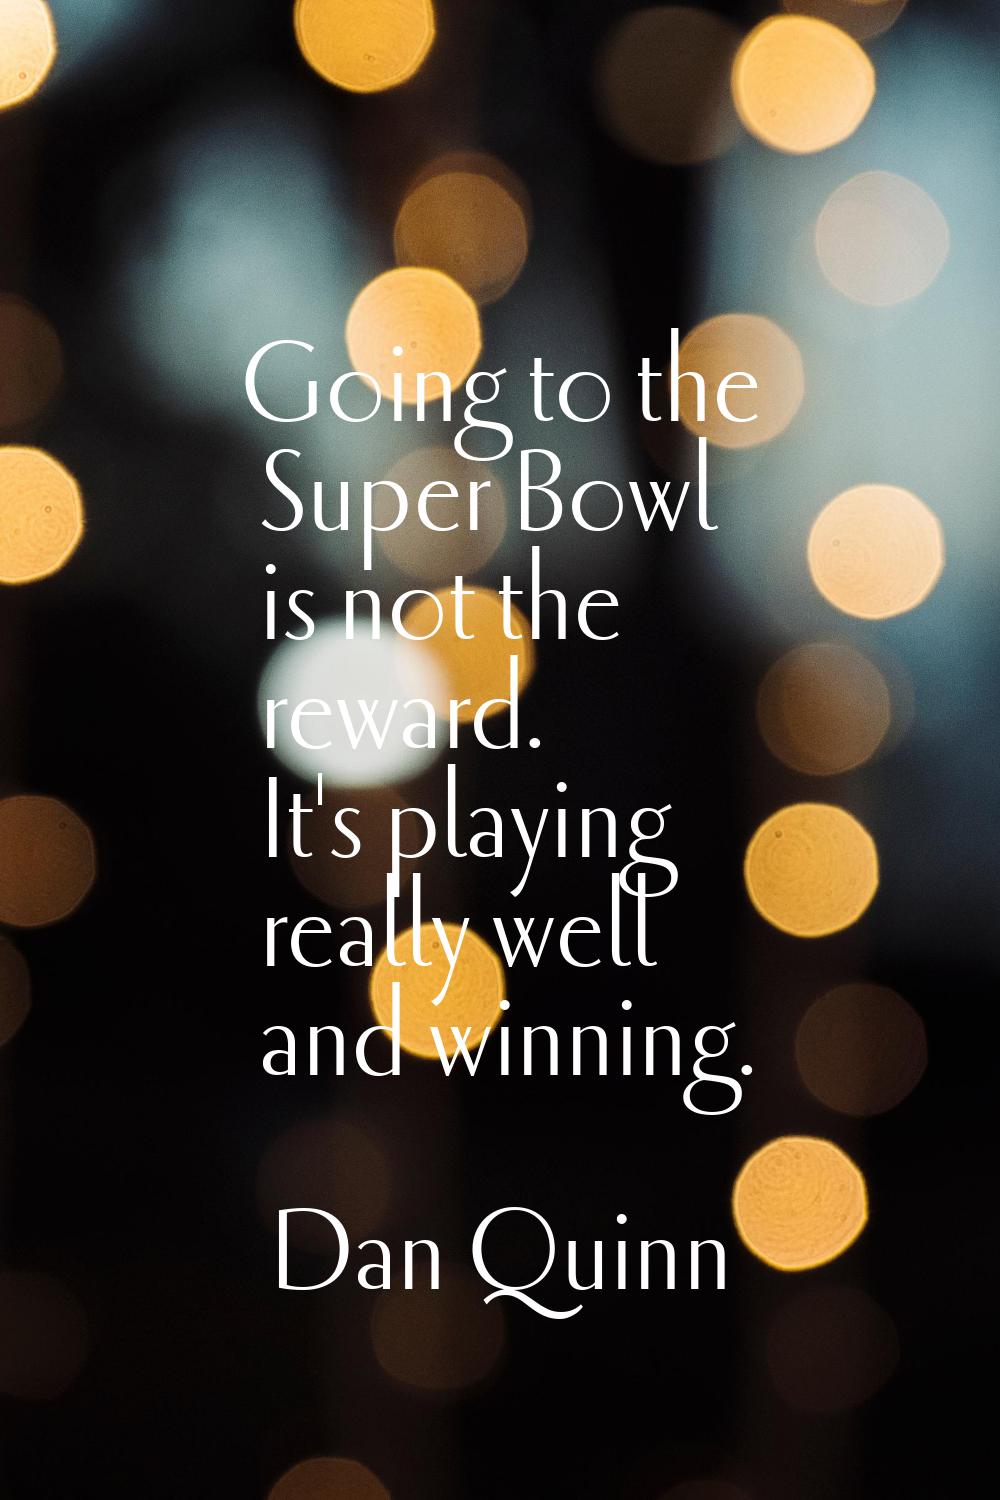 Going to the Super Bowl is not the reward. It's playing really well and winning.